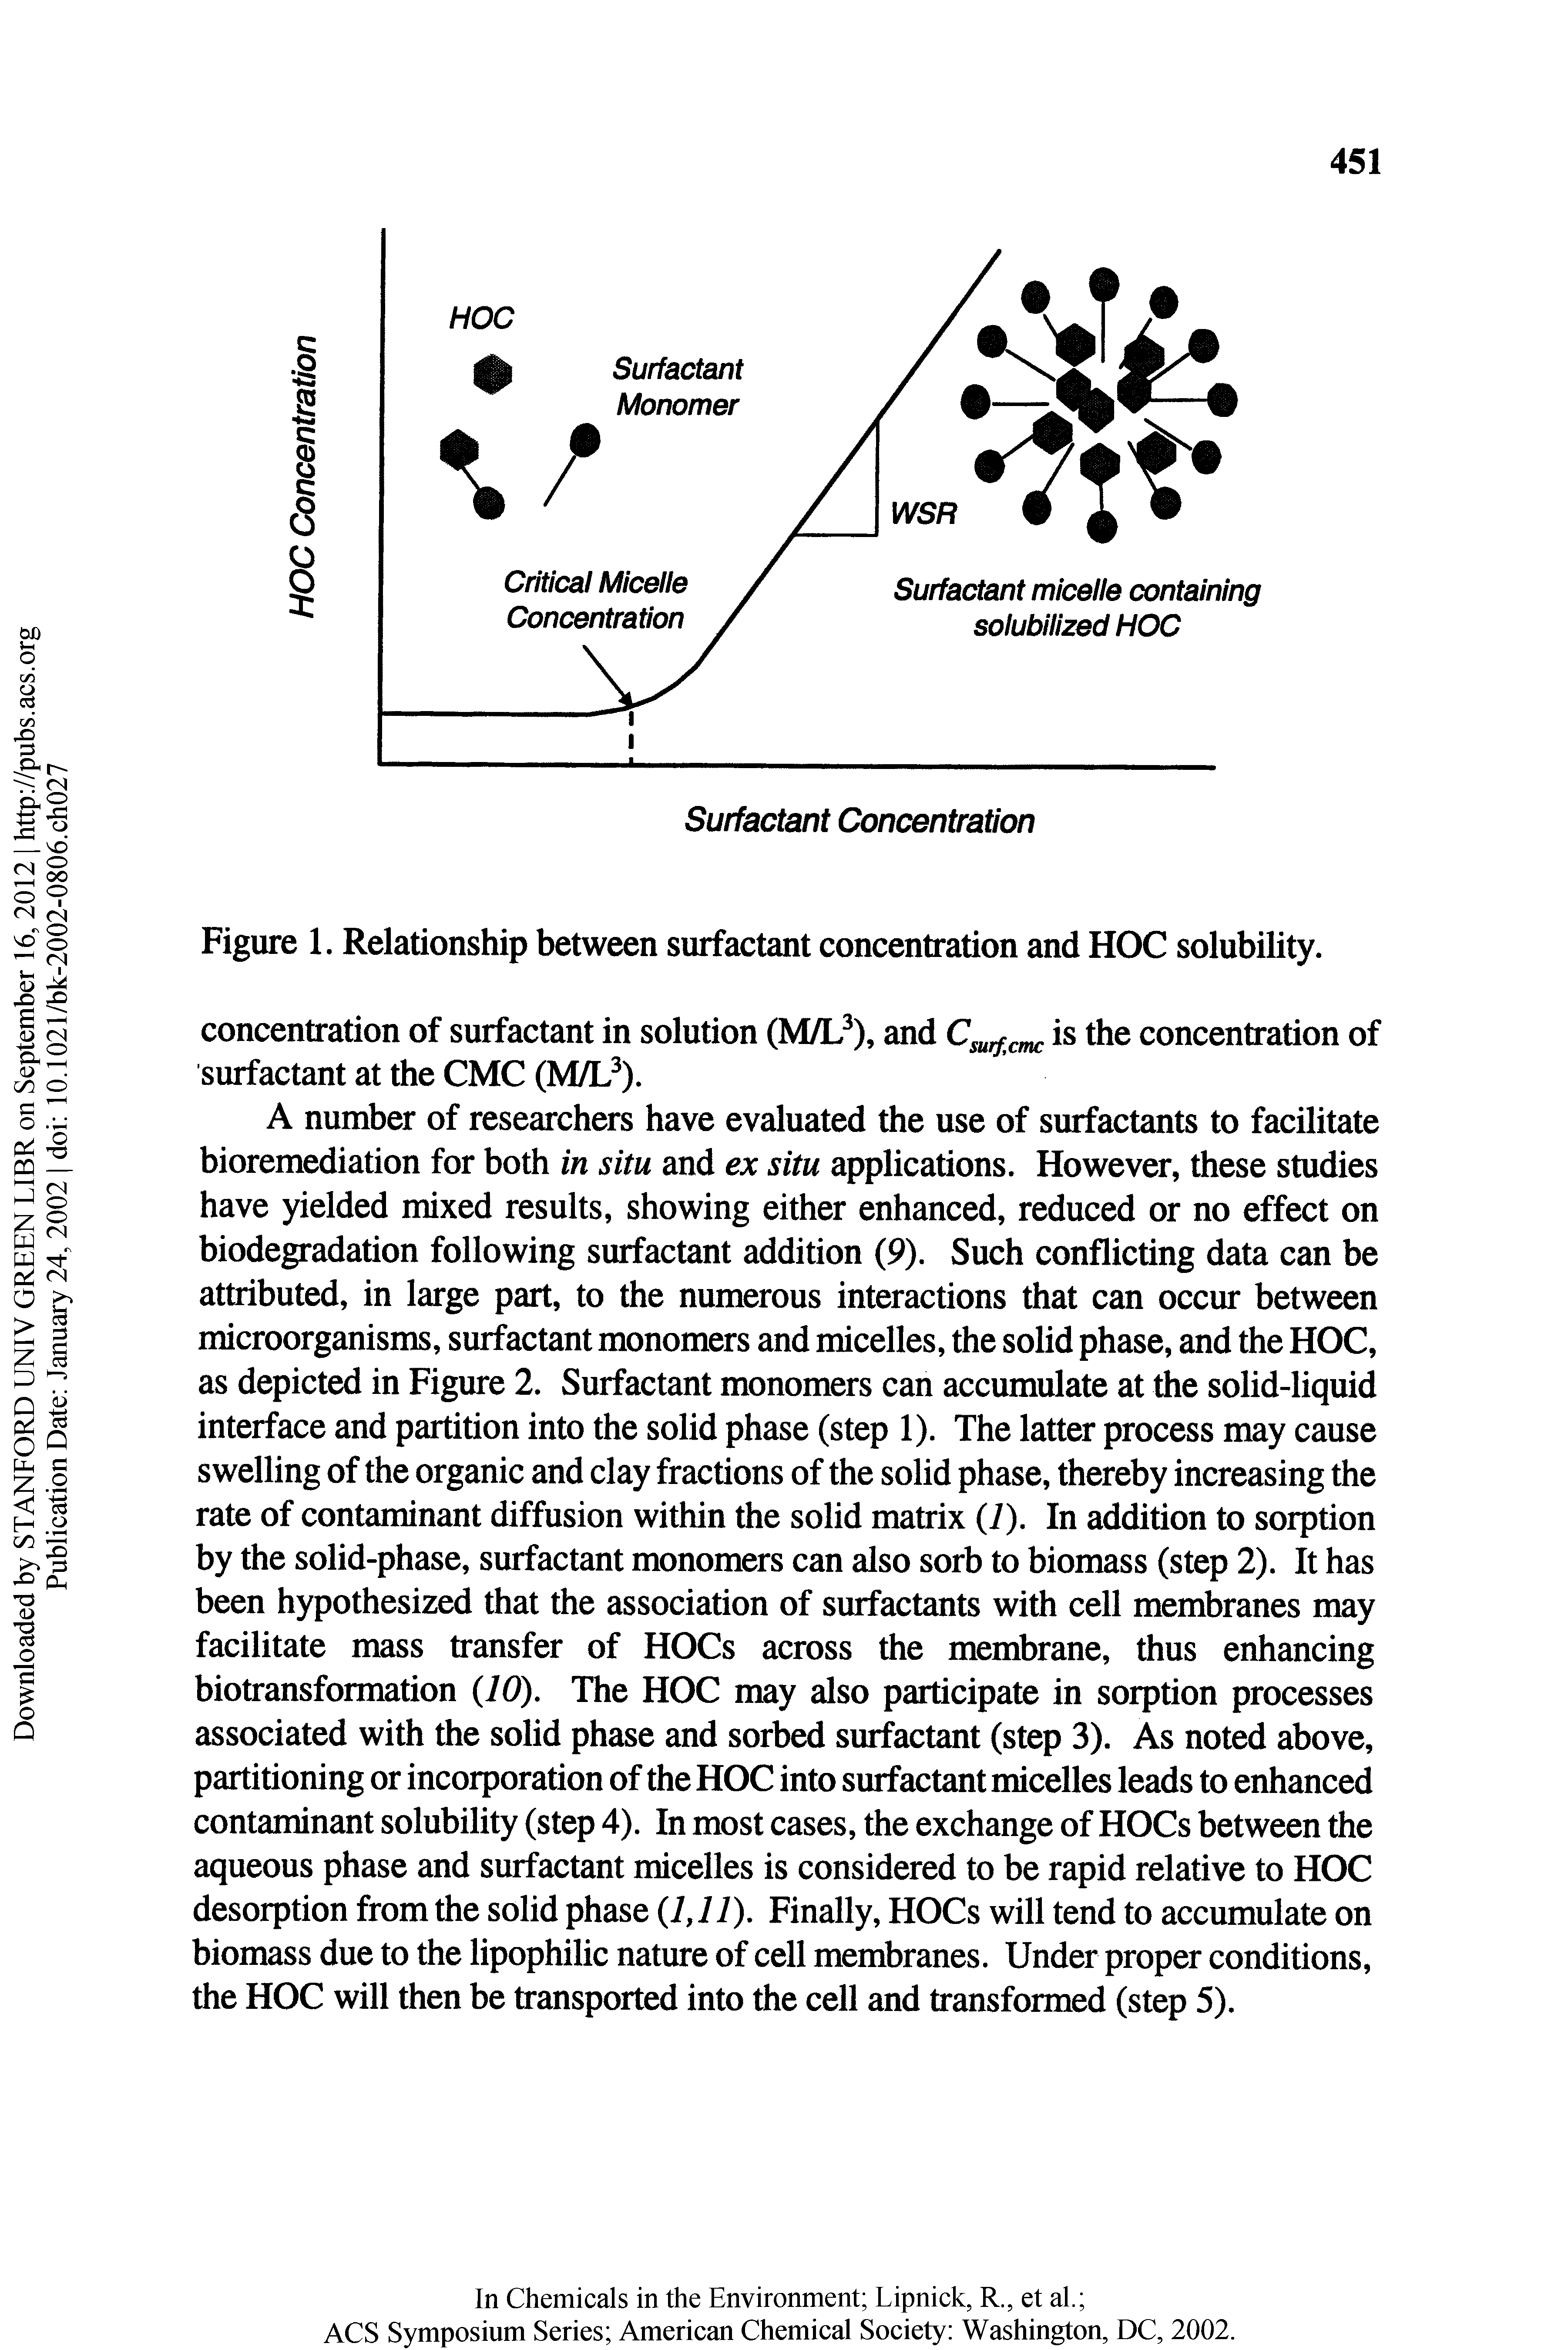 Figure 1. Relationship between surfactant concentration and HOC solubility.